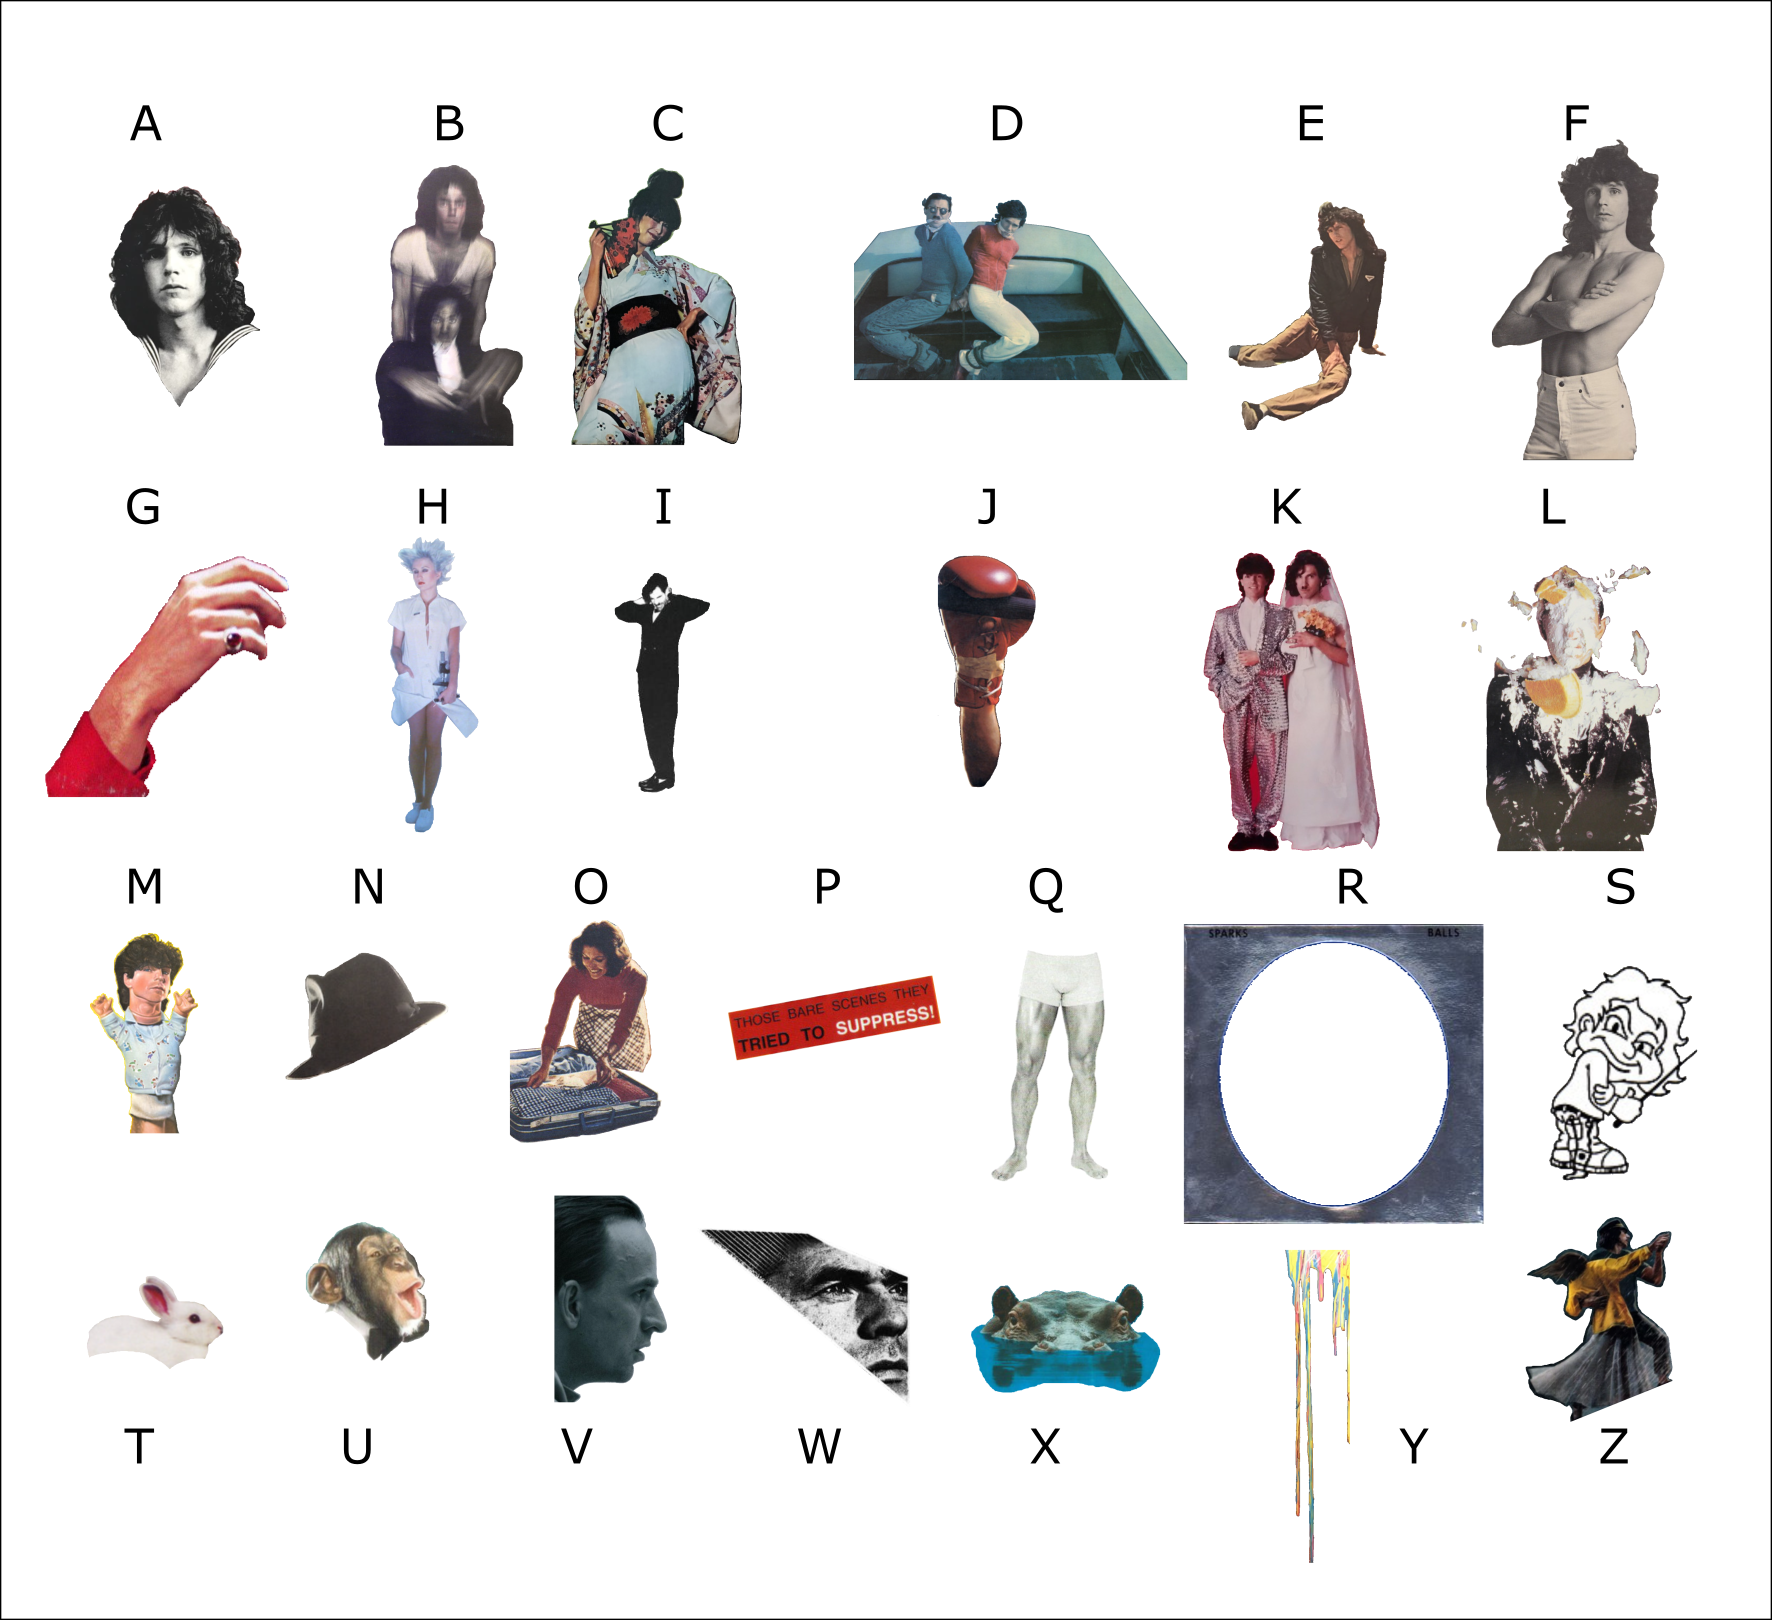 Sparks album to collage chart